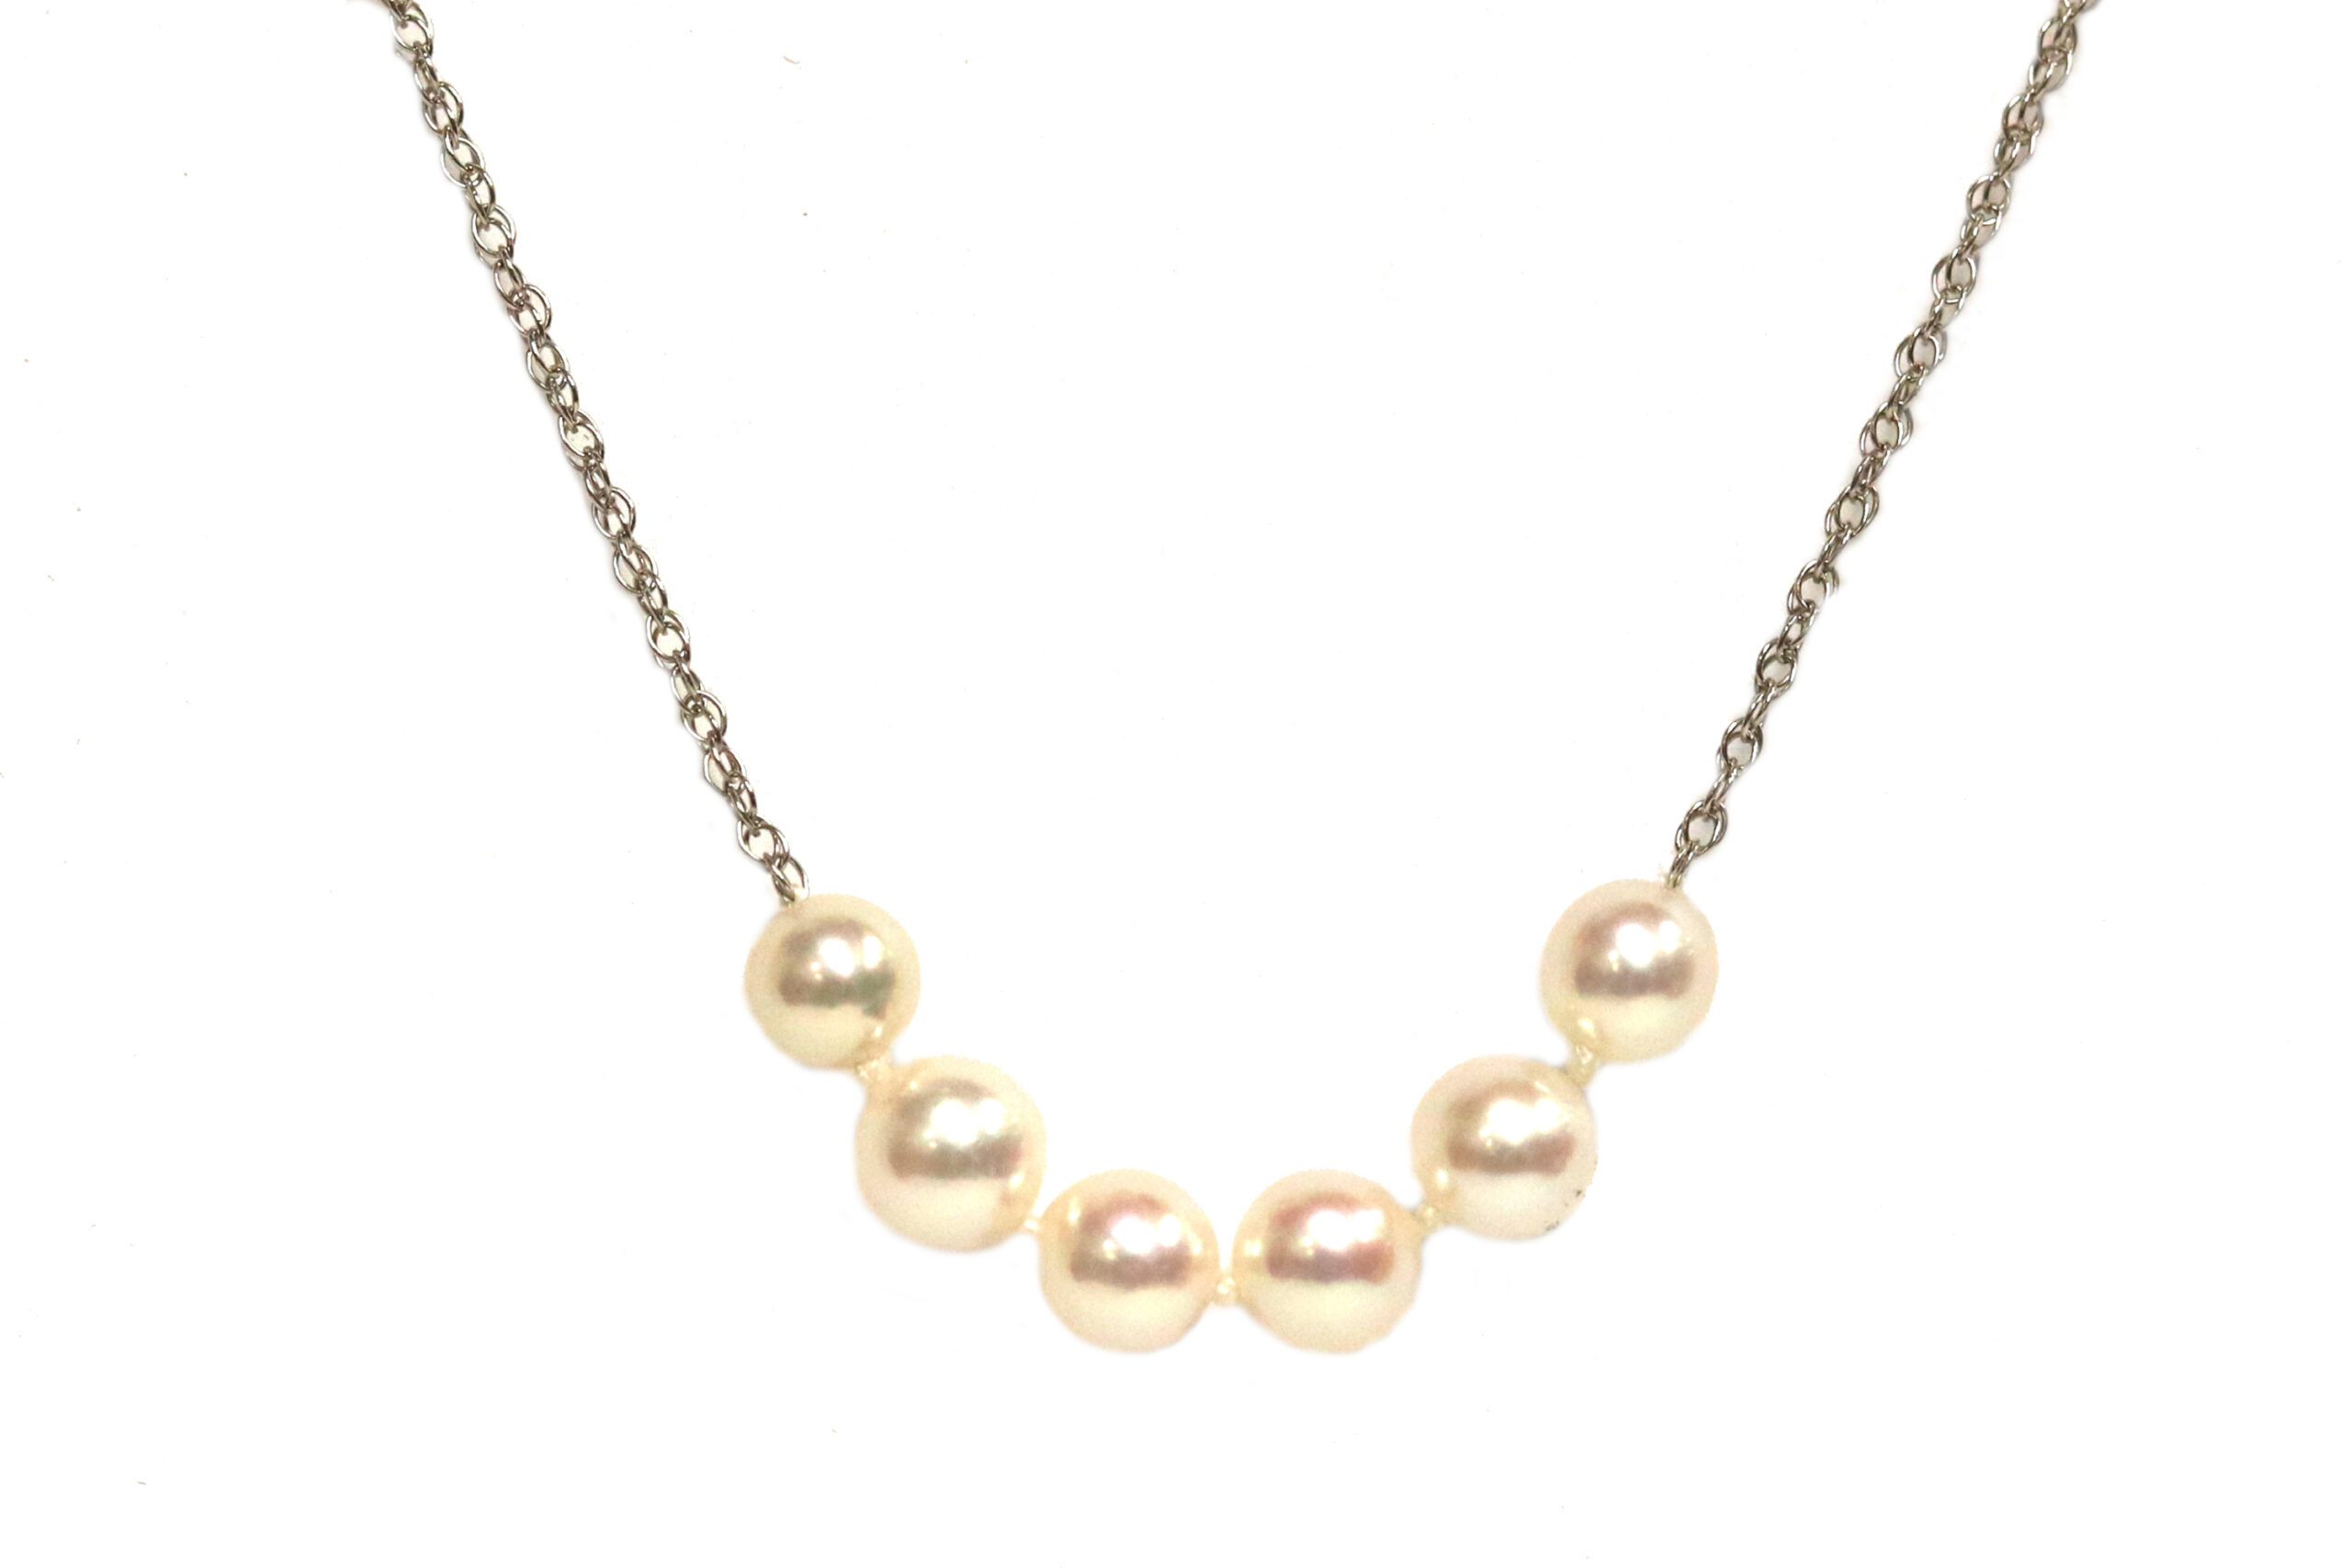 Princesse Pearl 5.5 - 6mm Starter Necklace - Pearson's Jewelry